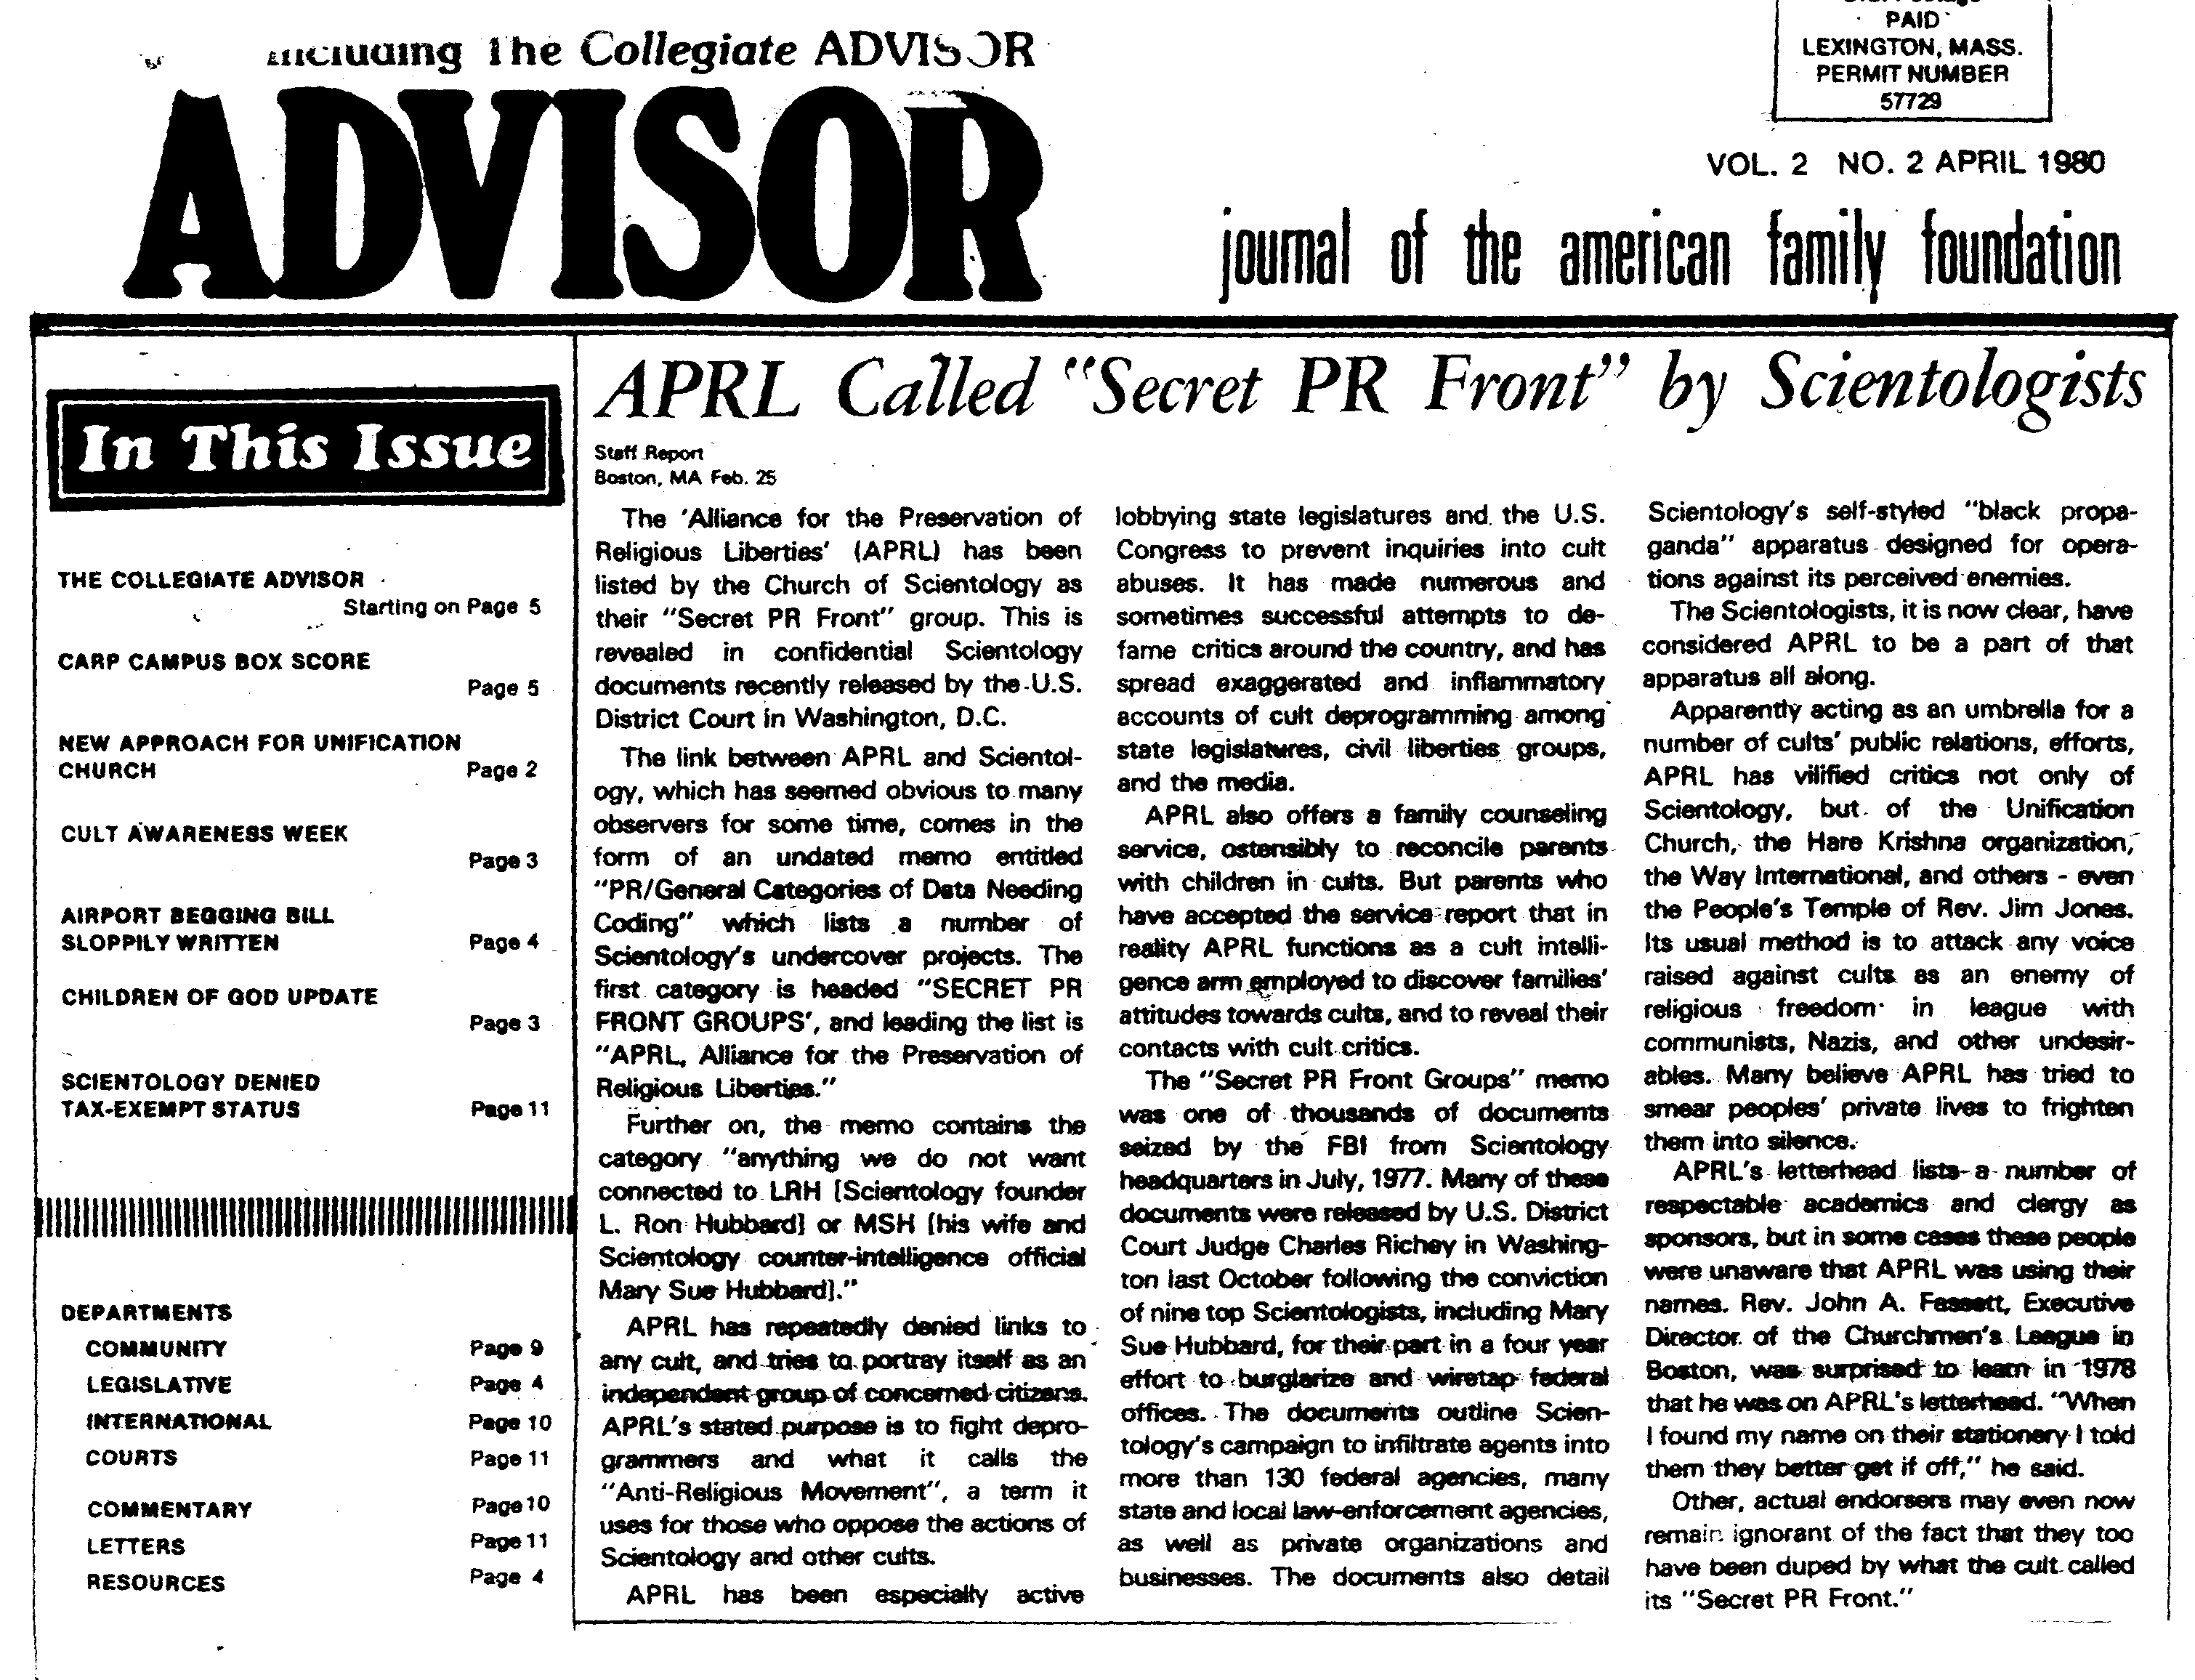 Full scan of Vol.2 No. 2 April 1980 Issue of The Collegiate Advisor, about the APRL scientology fropnt group